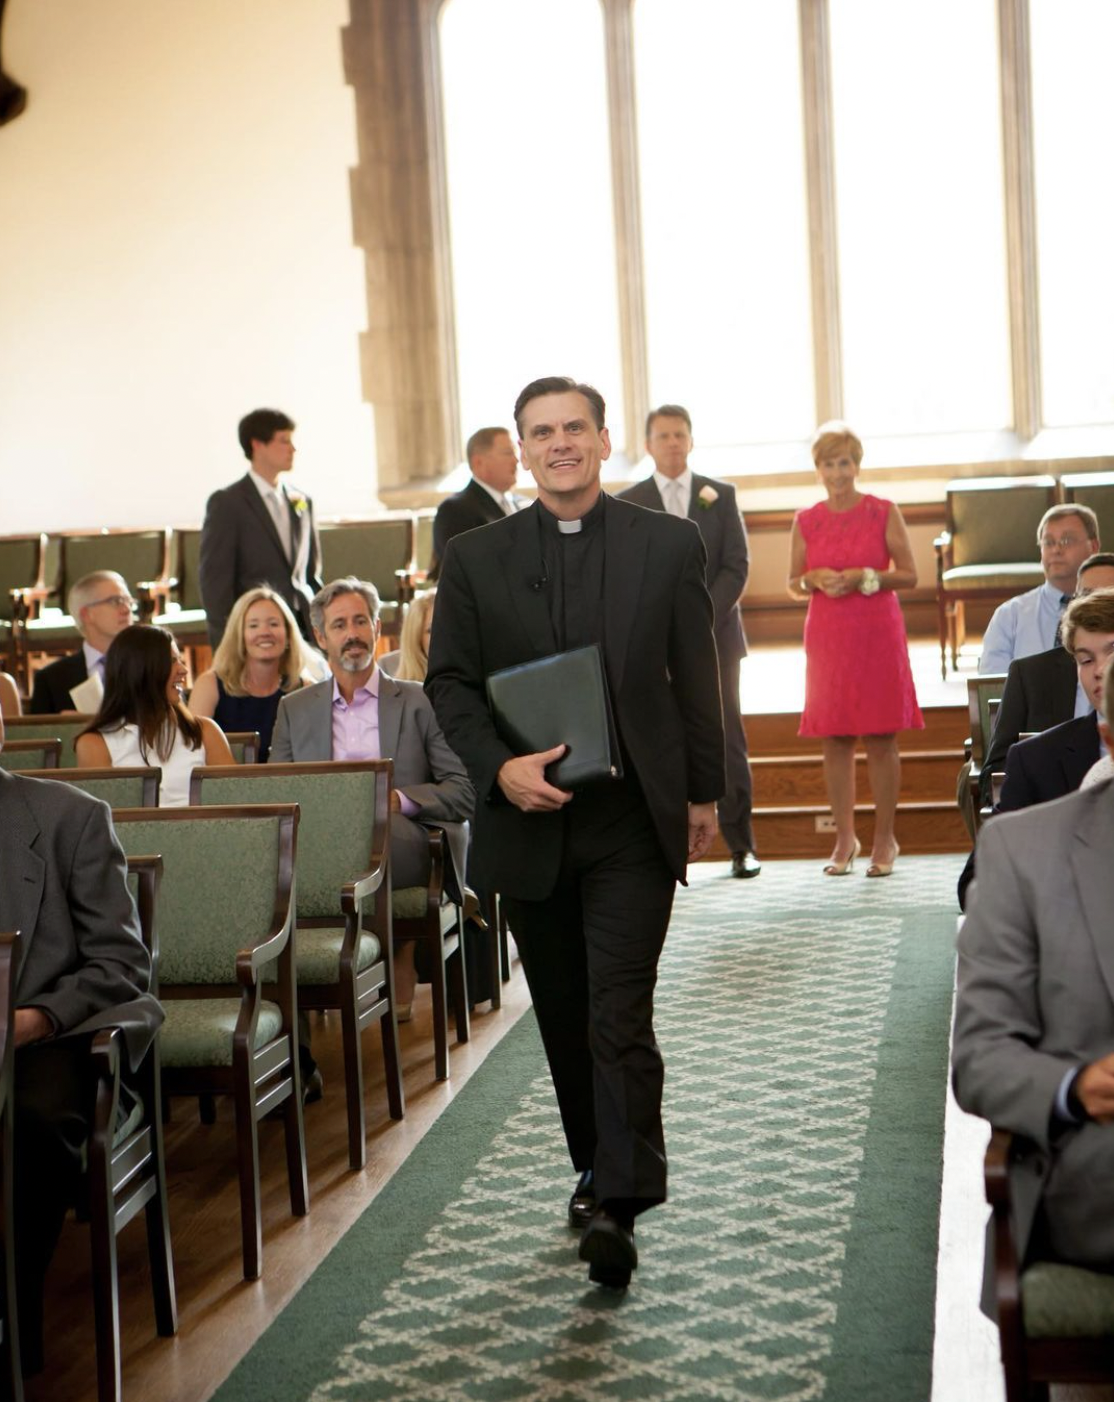 Wedding officiant walks down the aisle to lead wedding ceremony in church